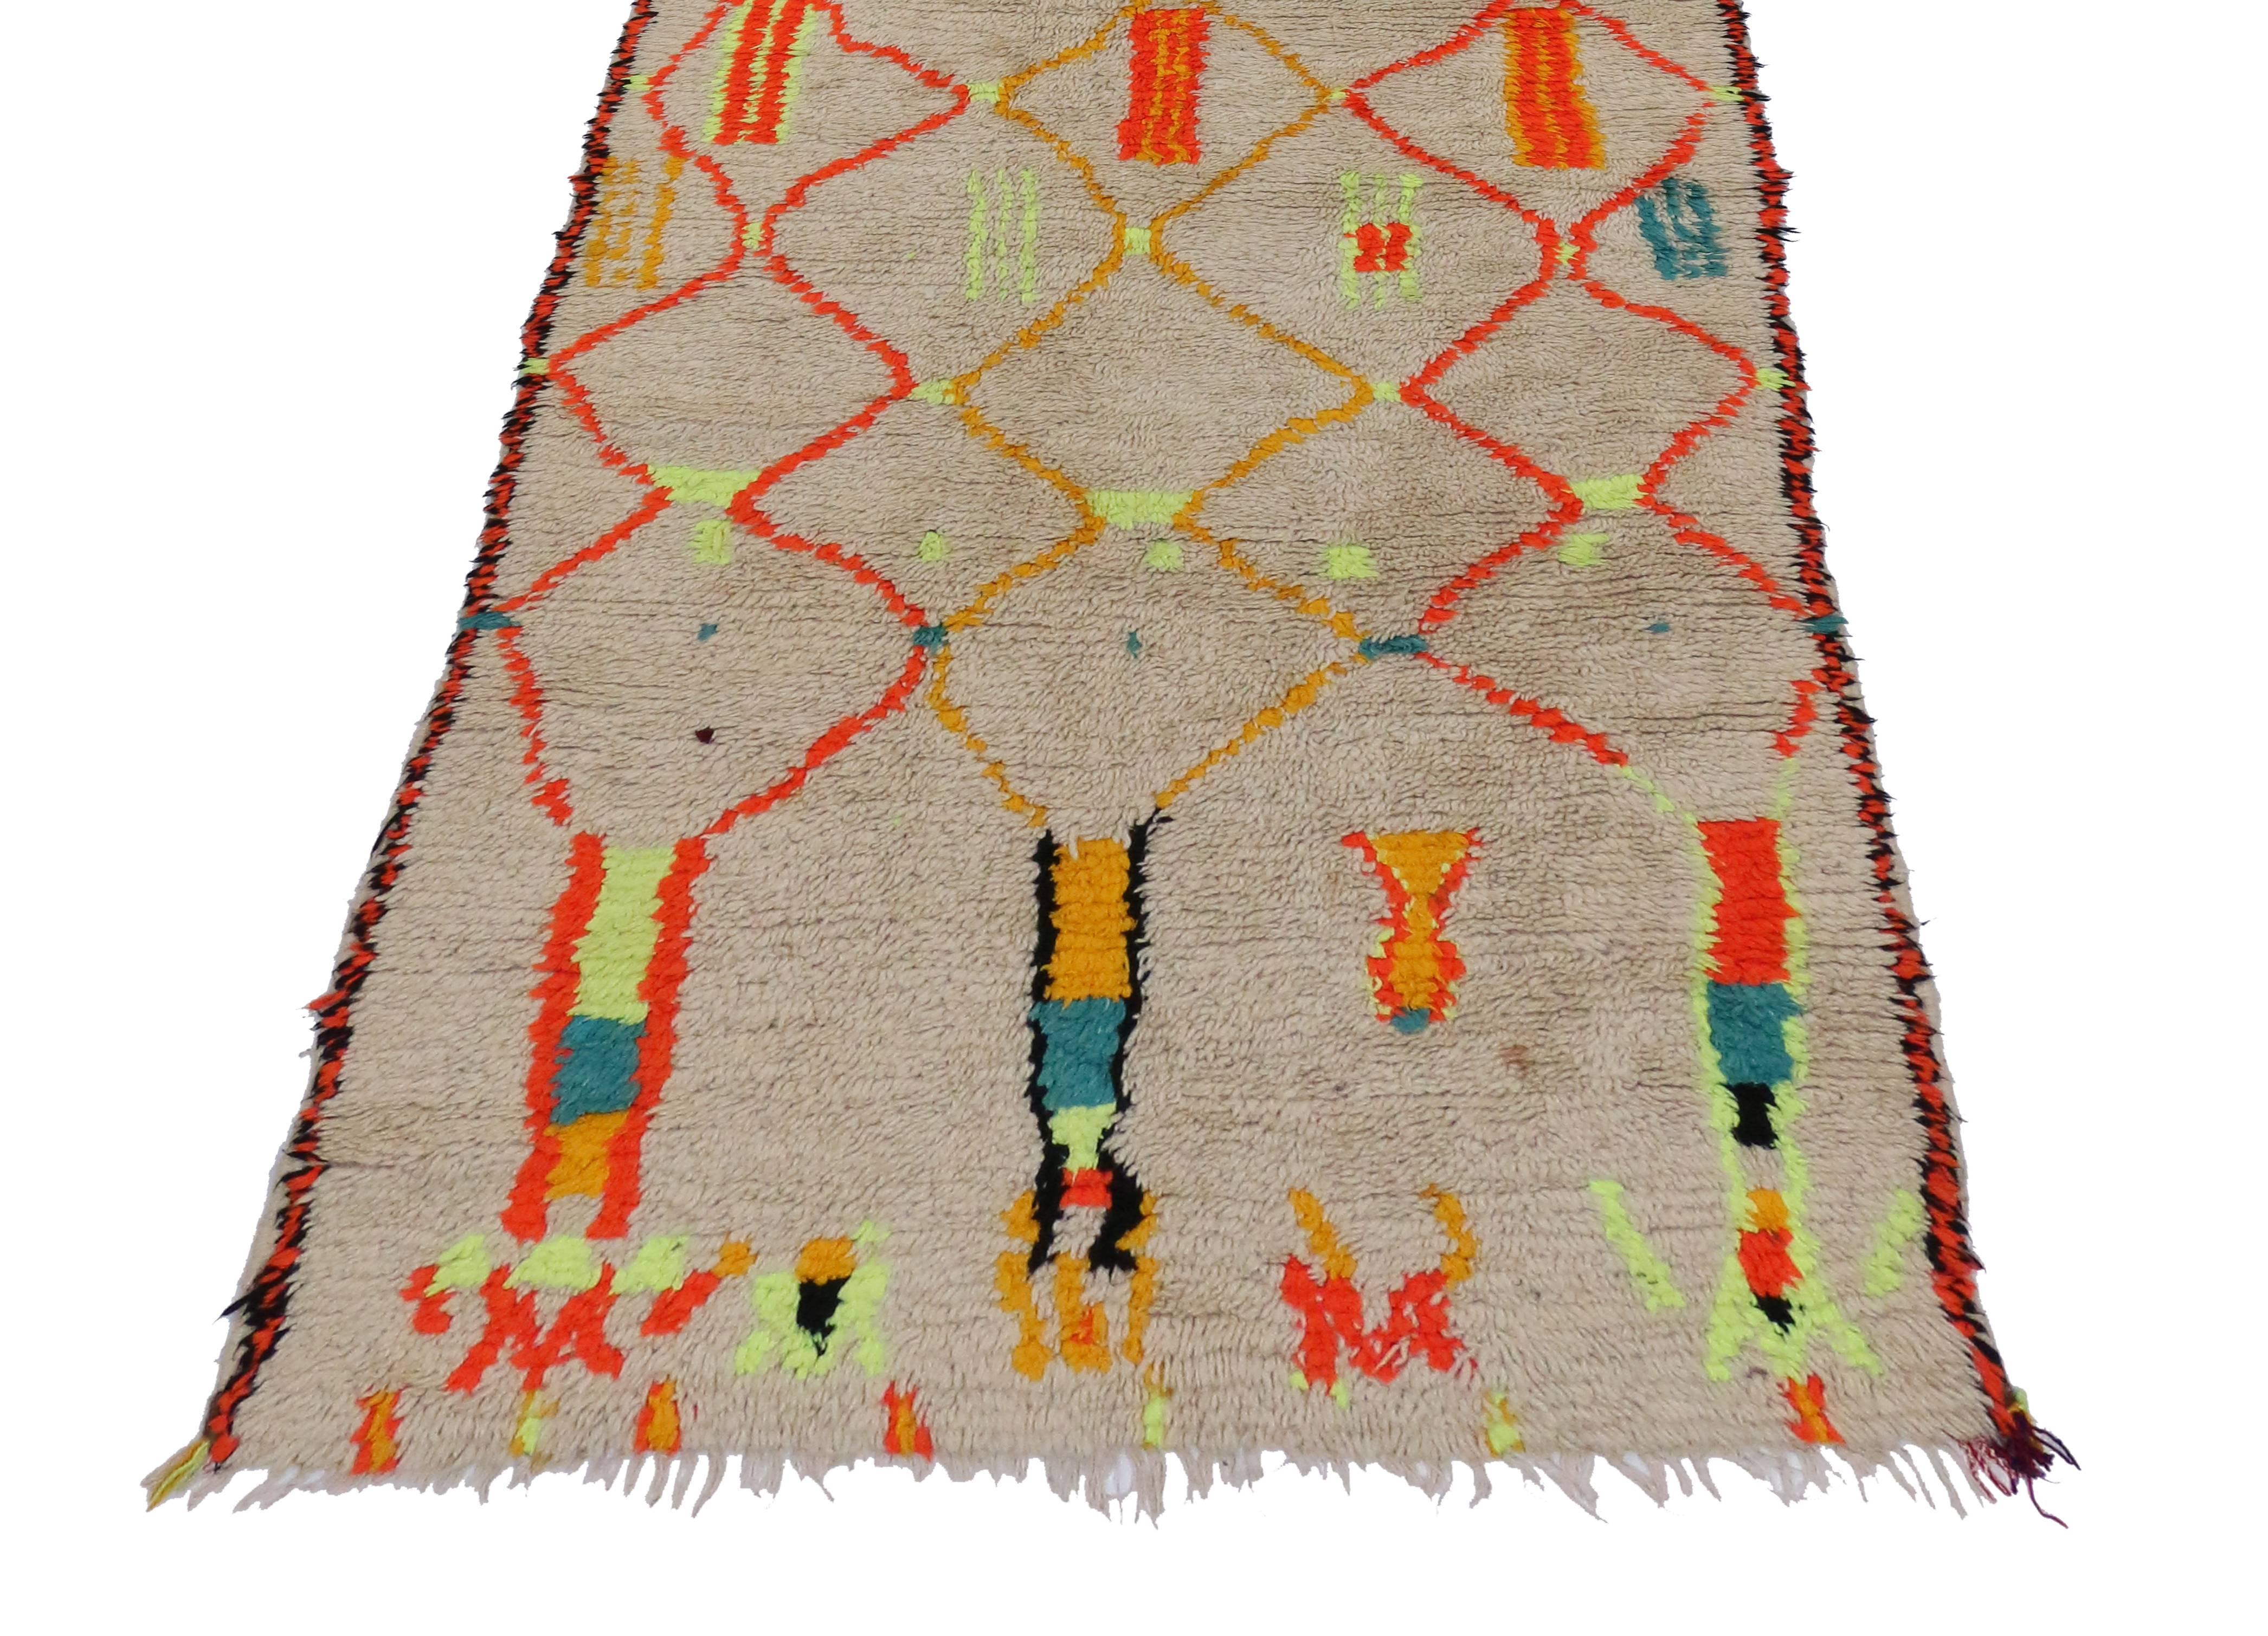 Hand-Knotted Boho Chic Vintage Berber Moroccan Runner with Modern Tribal Design